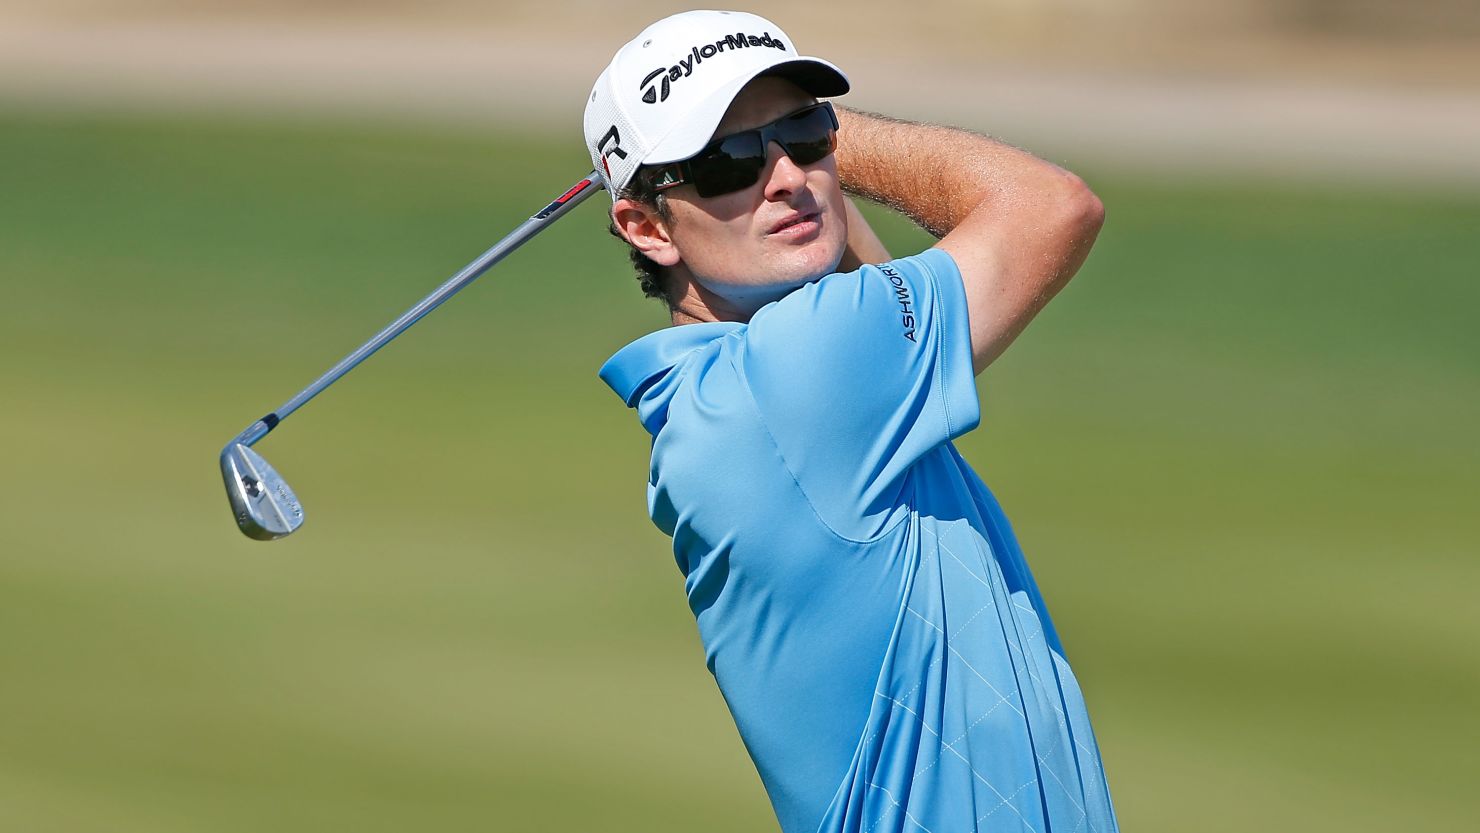 Justin Rose leads the Abu Dhabi Golf Championship by two strokes after 54 holes. 